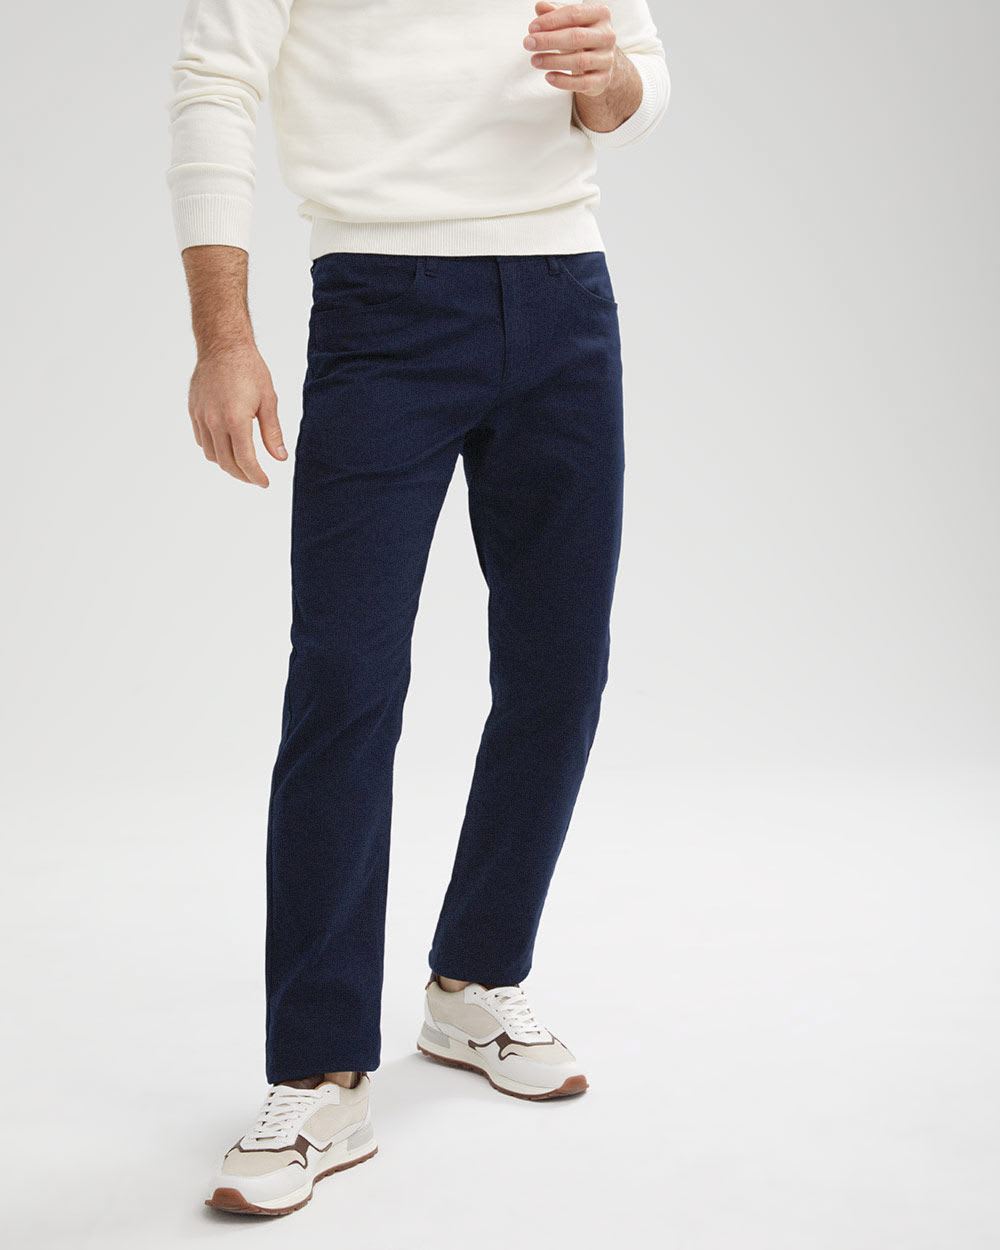 Straight Fit 5-Pocket Stretch Pant – 32"